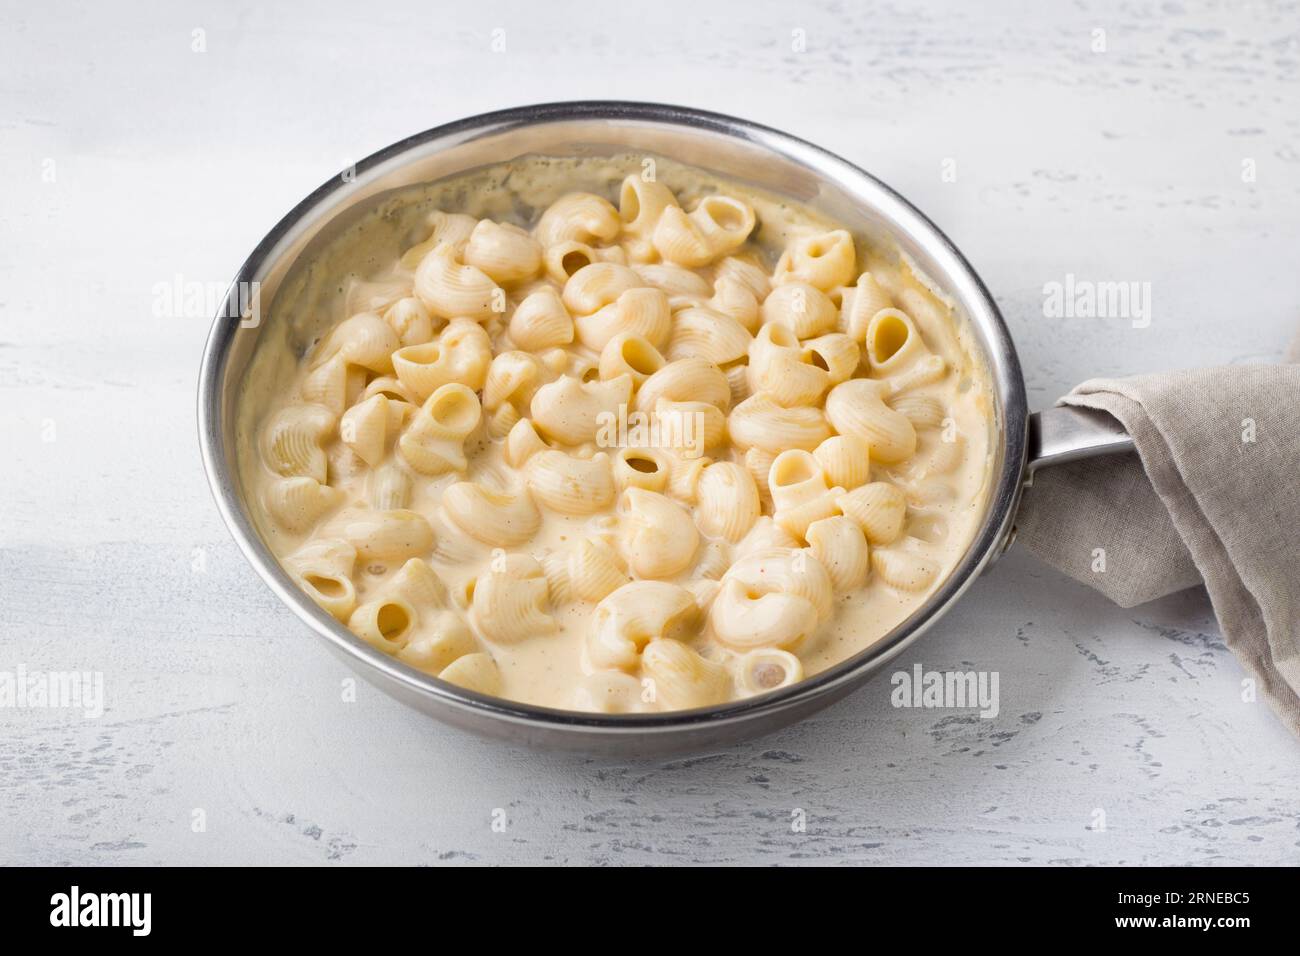 Cooking mac and cheese, American pasta. Adding cooked pasta to cheese sauce in a frying pan on a light gray background. Cooking stage Stock Photo